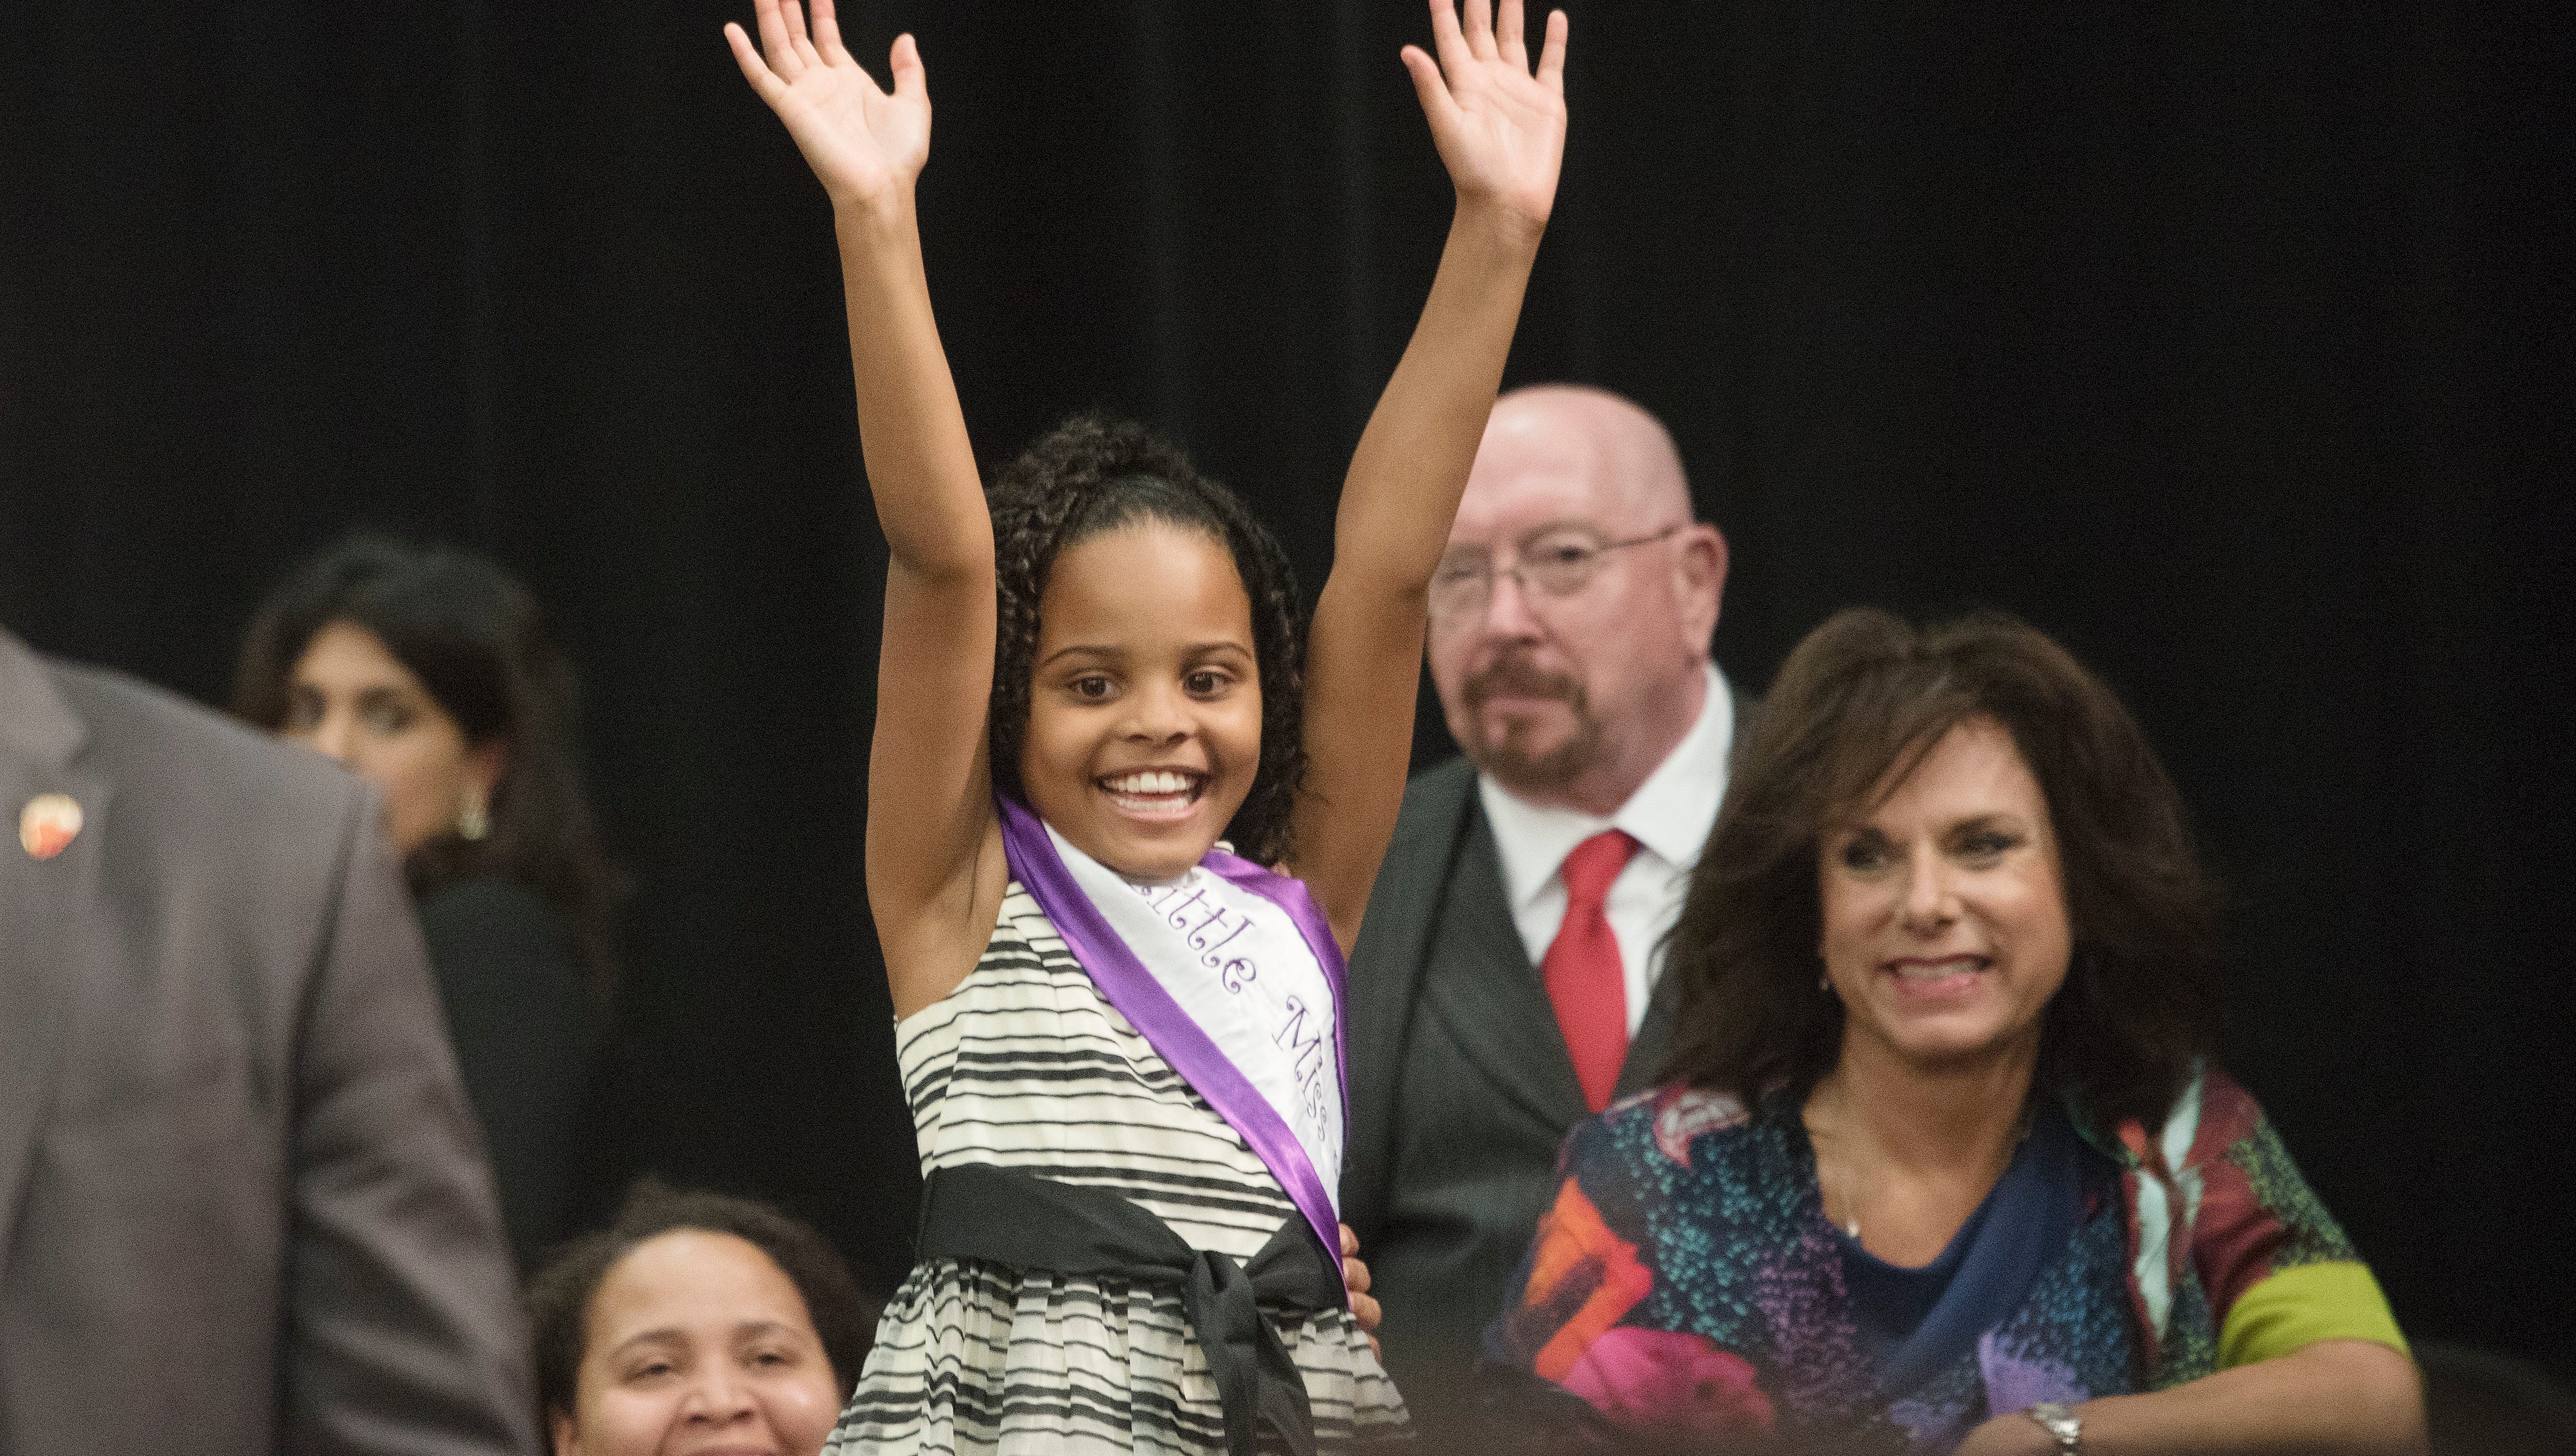 "Little Miss Flint" Mari Copeny acknowledges President Barack Obama when he mentioned her during his remarks. It was Copeny's letter to the president that prompted his visit to Flint.